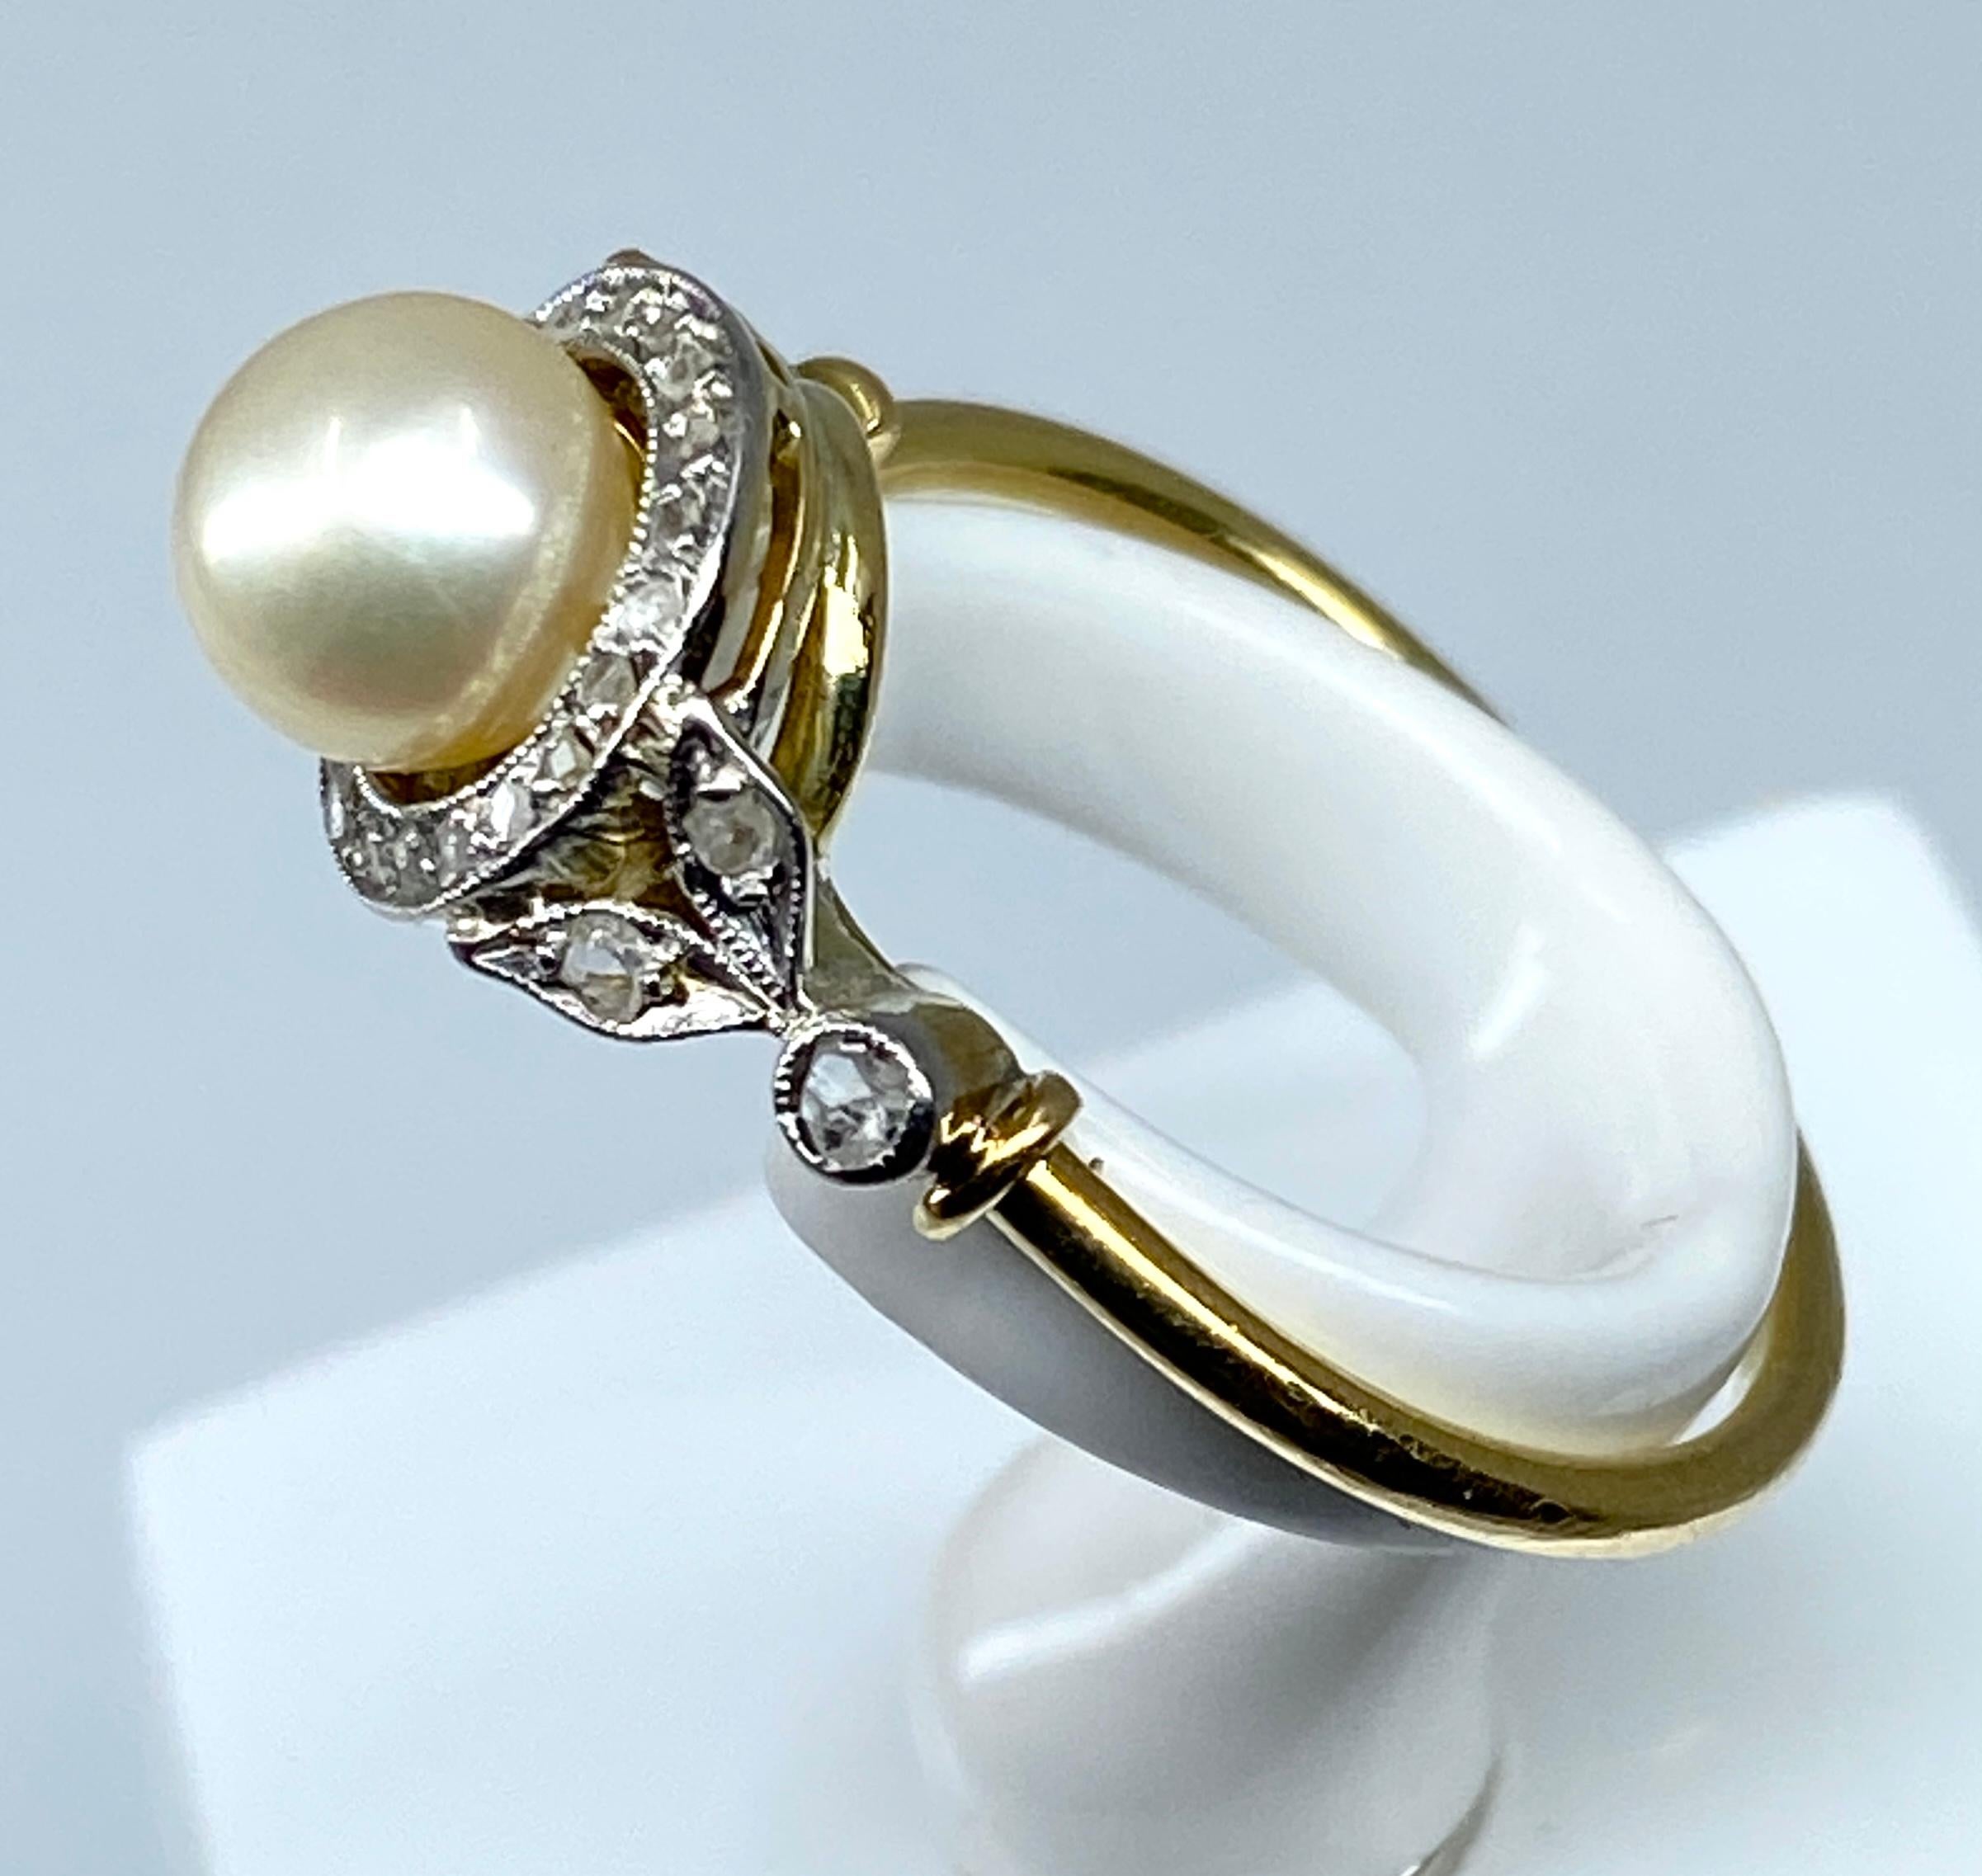 Art Nouveau 18 carat gold ring set with a pearl and diamonds, 1900 period. For Sale